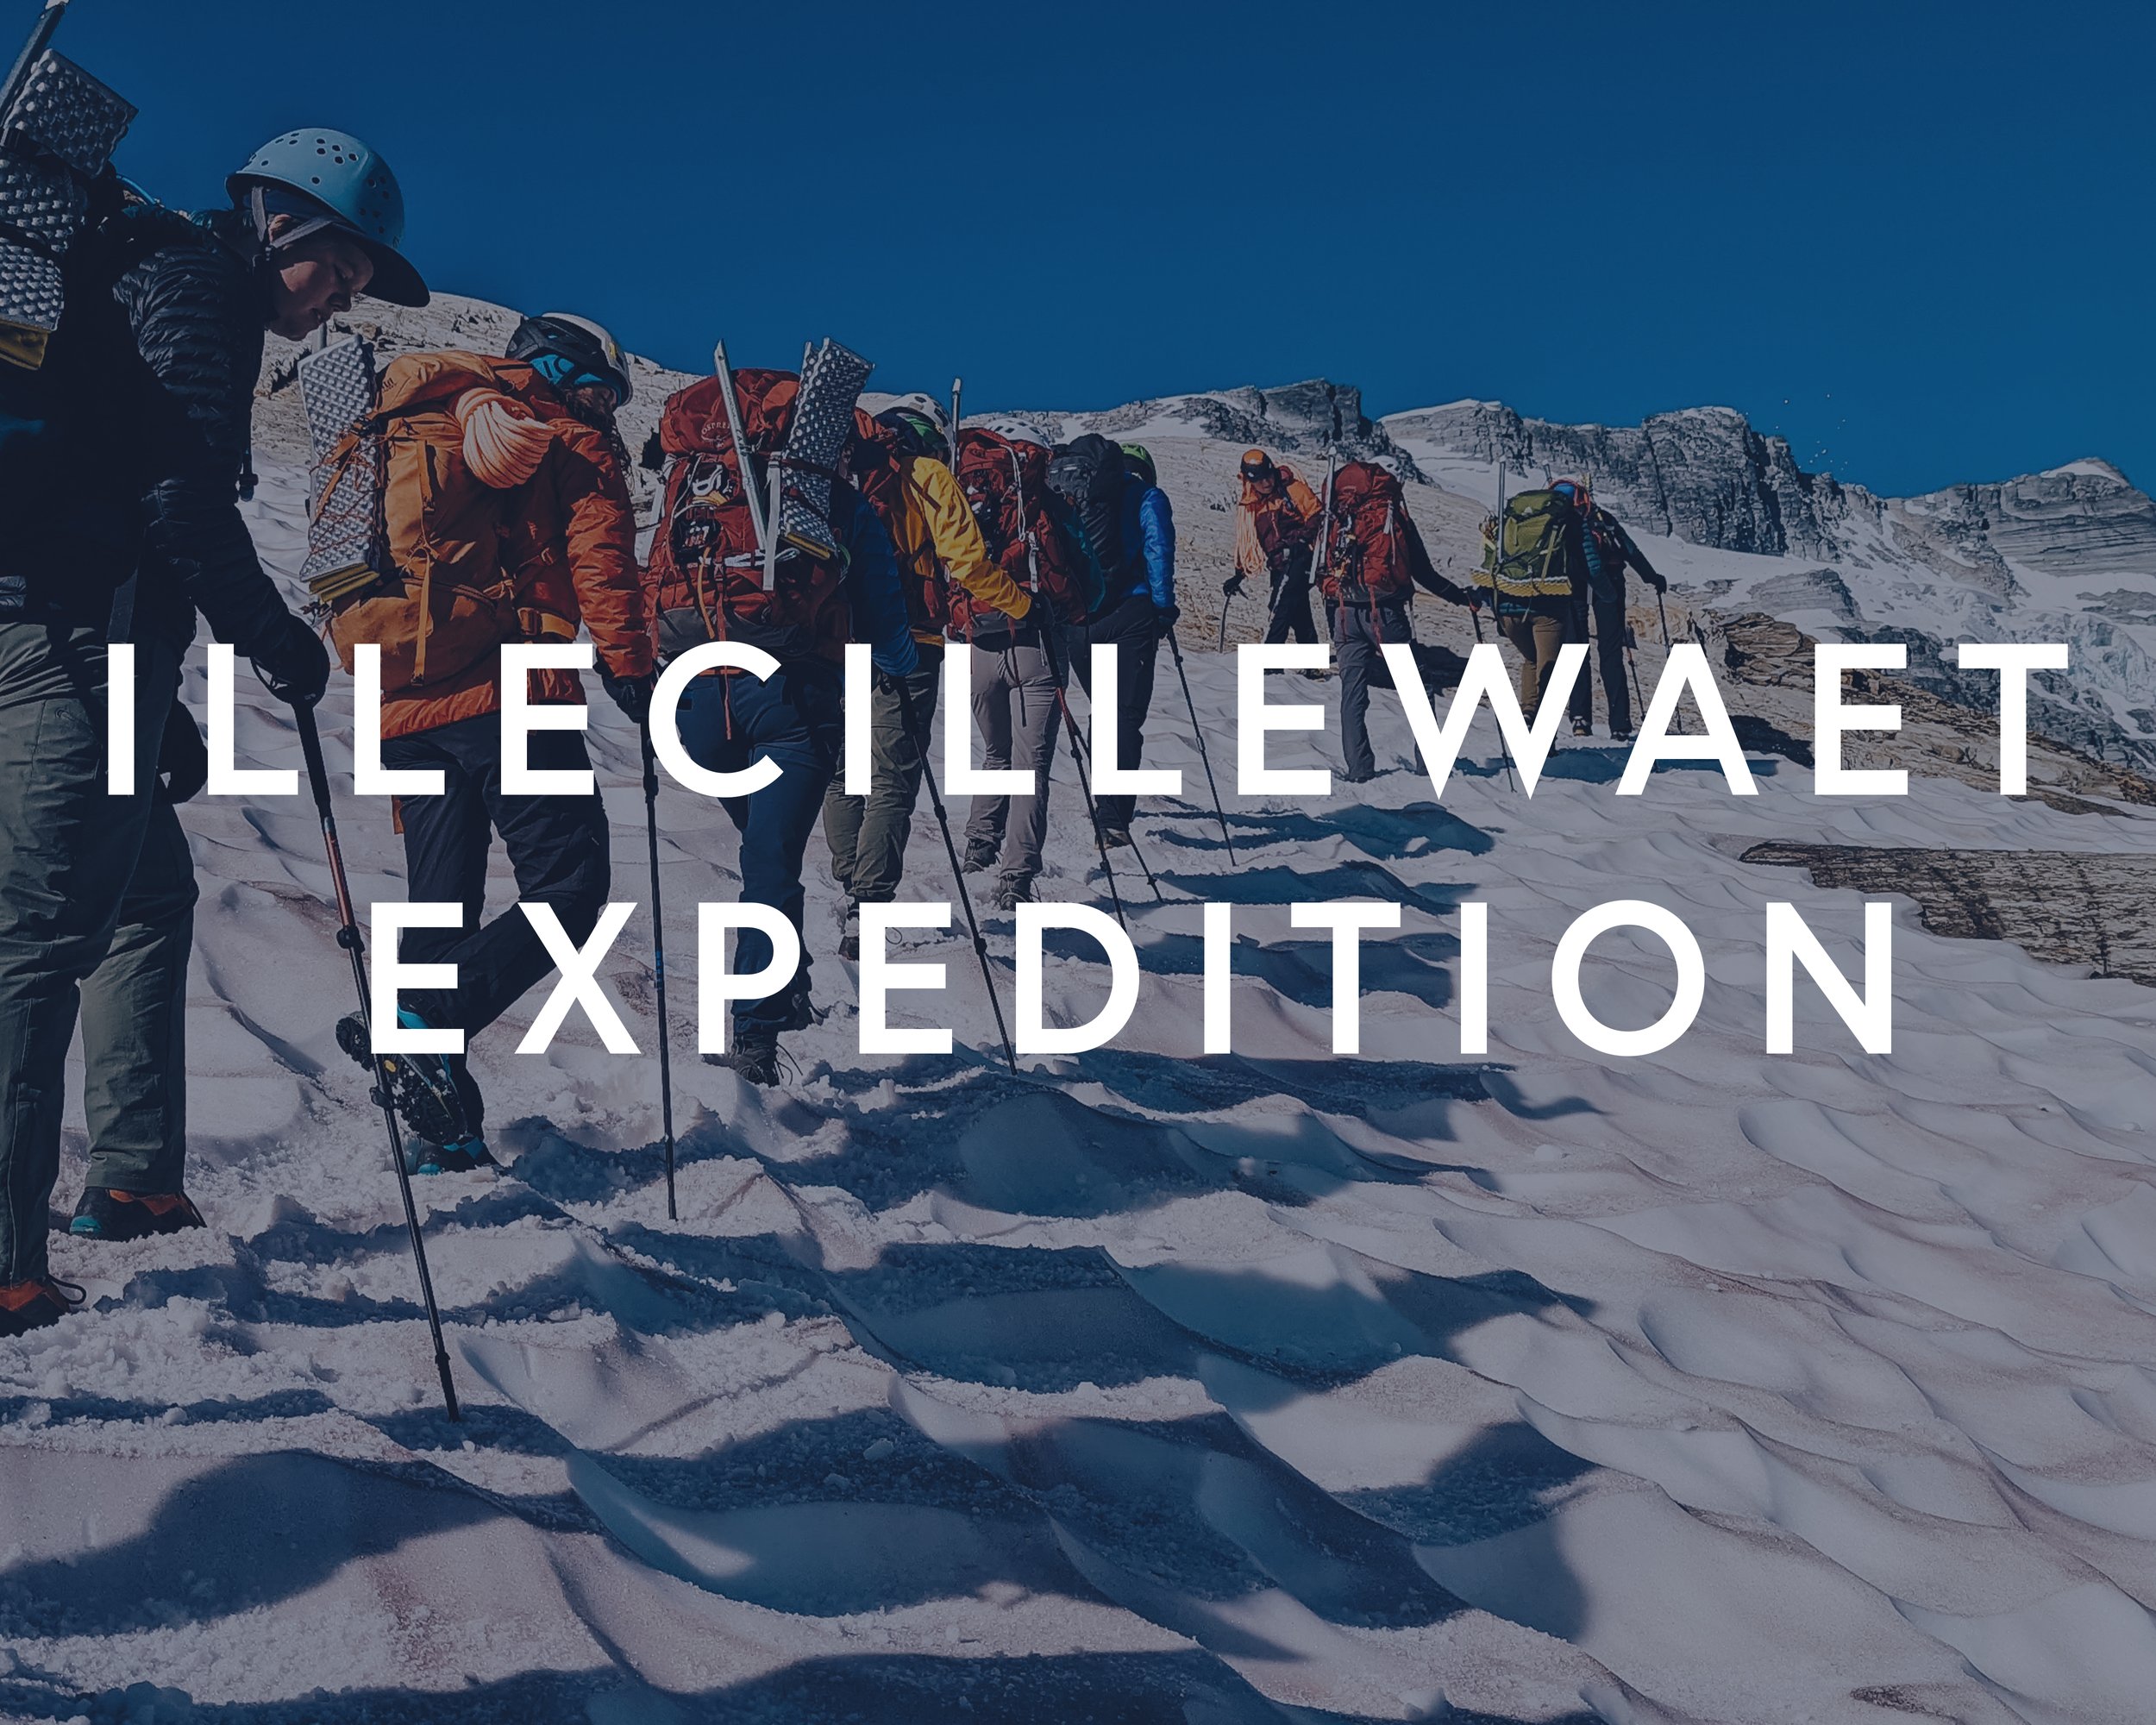 Image links to the Illecillewaet expedition information page